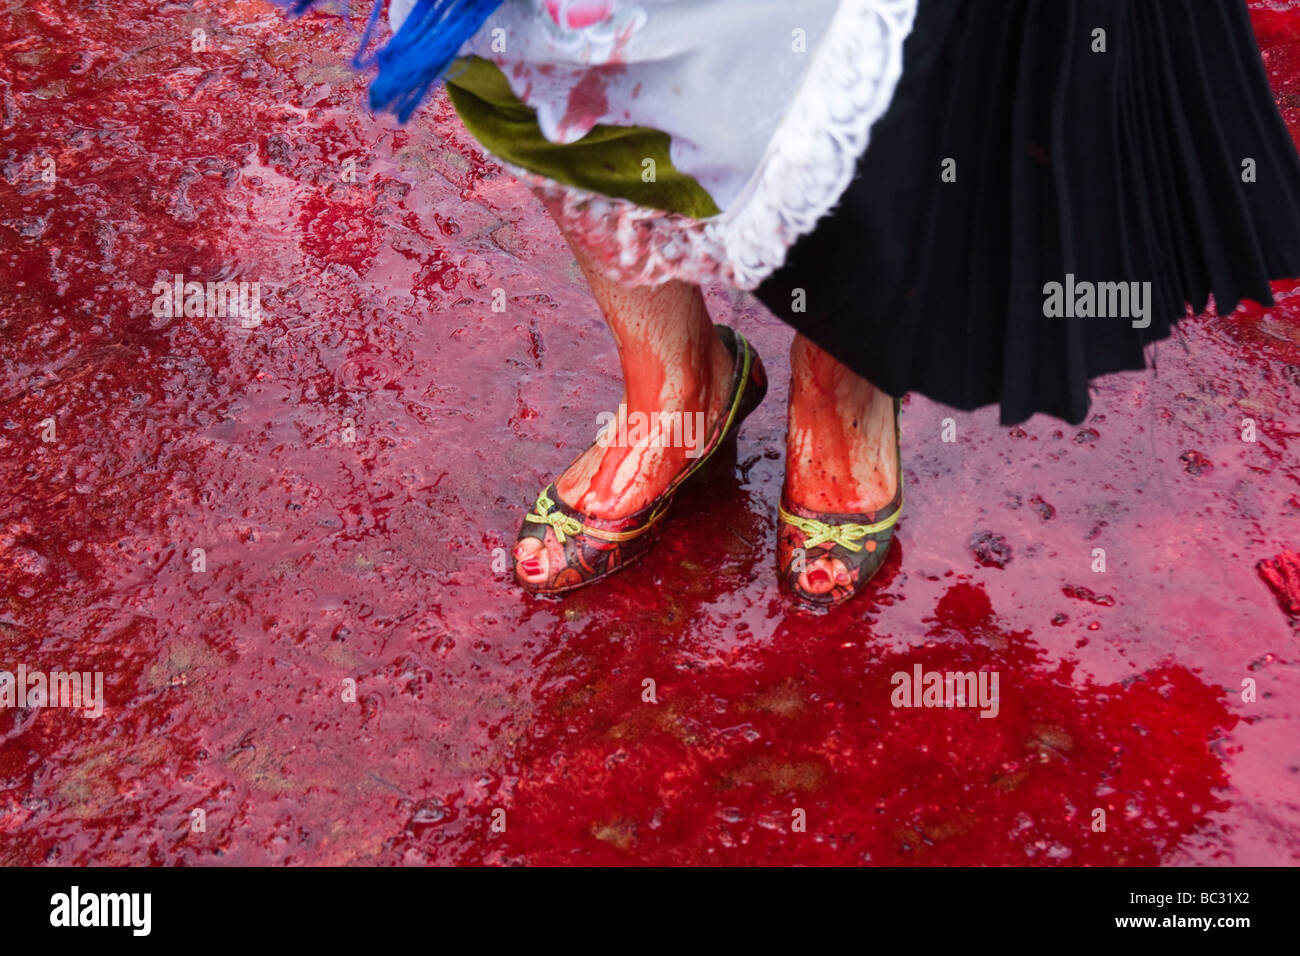 A woman dances in the blood of a slaughtered bull in Paracho, Michoacan, Mexico. Stock Photo